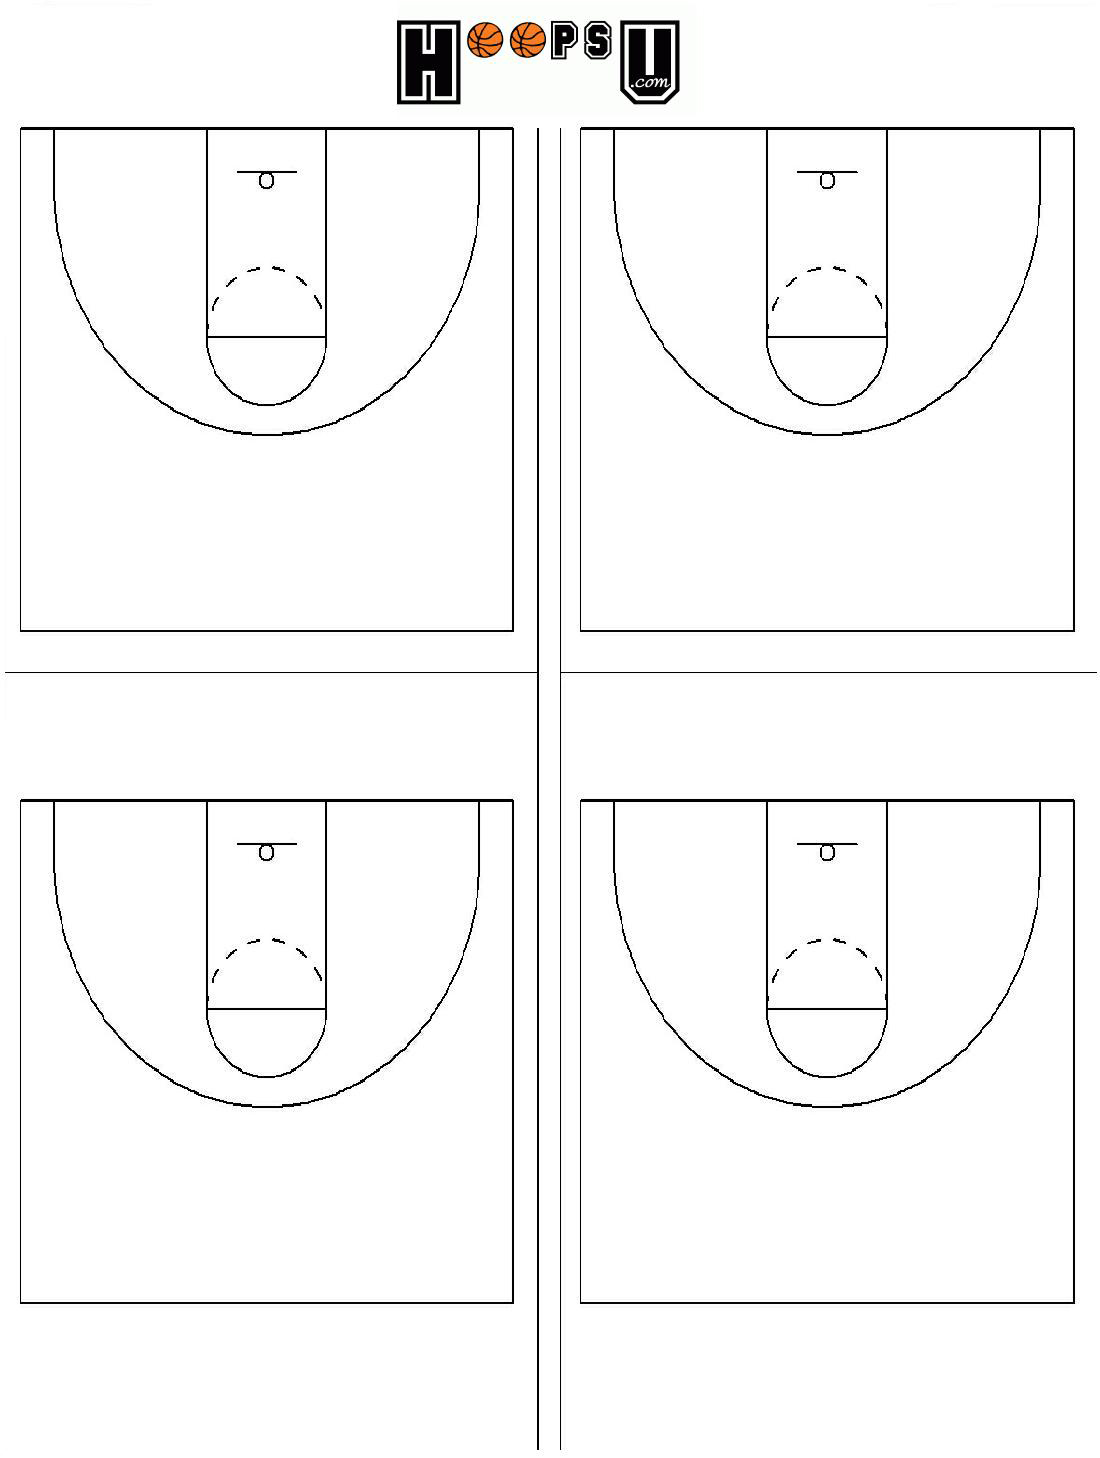 blank volleyball court sheets - blank volleyball court pages